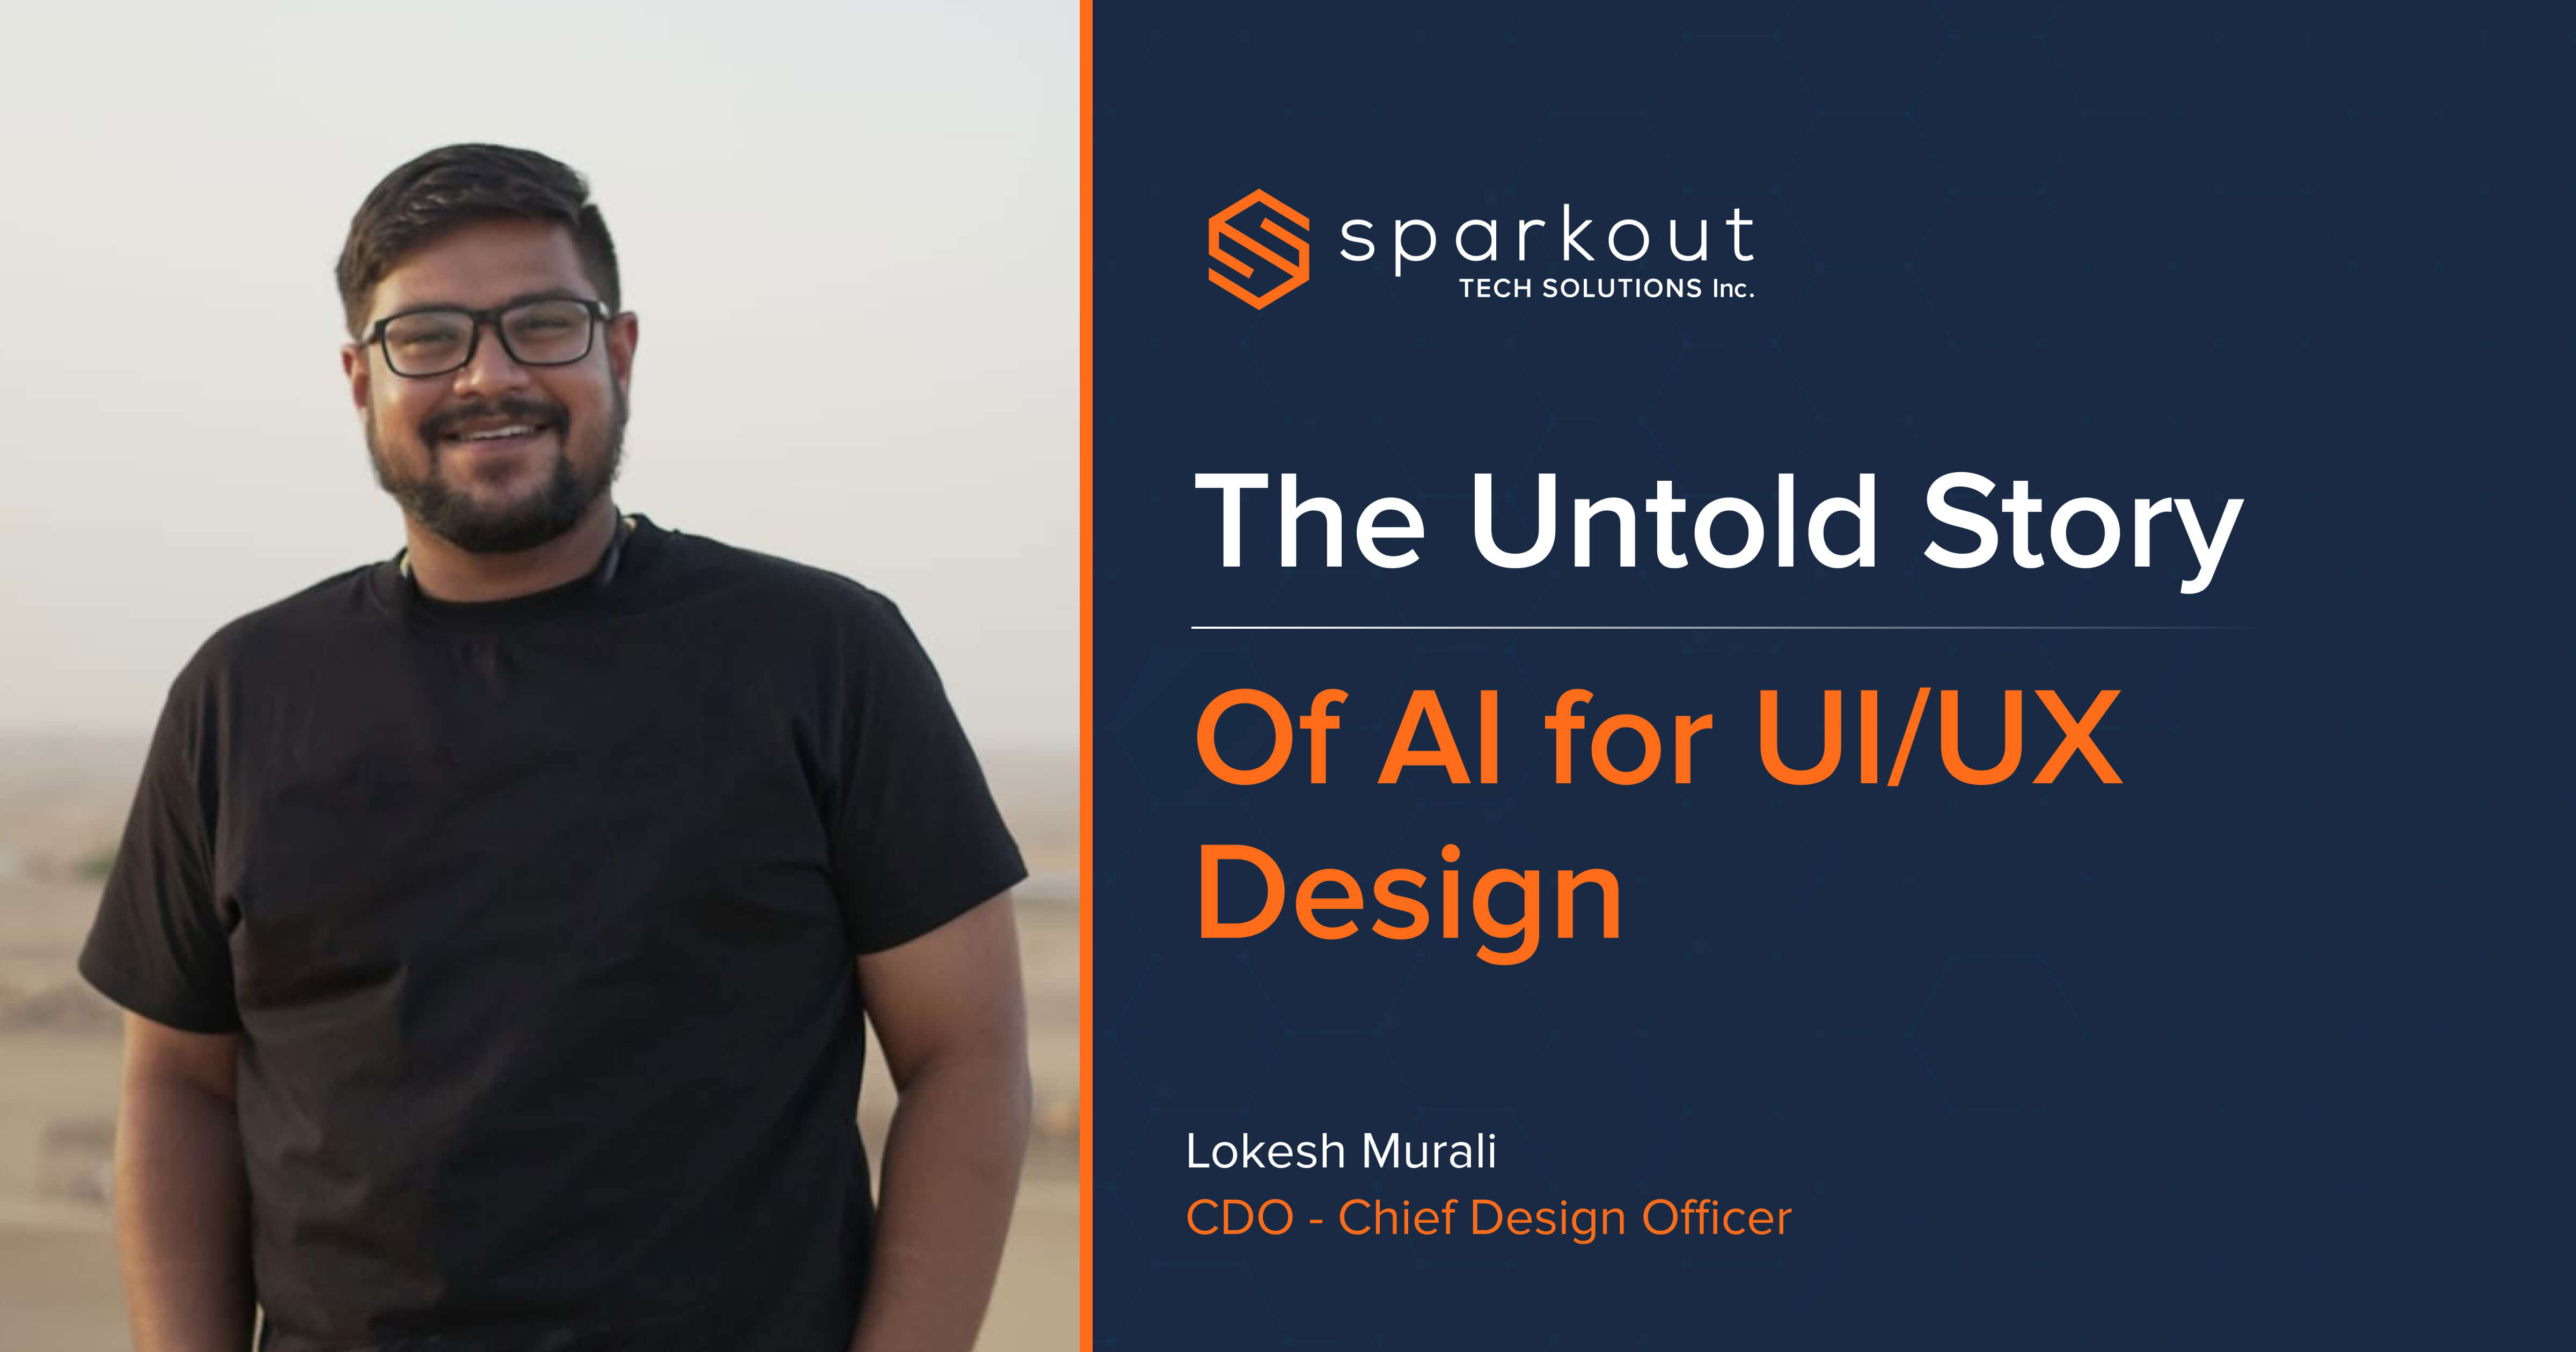 The Untold Story of AI for UI/UX Design